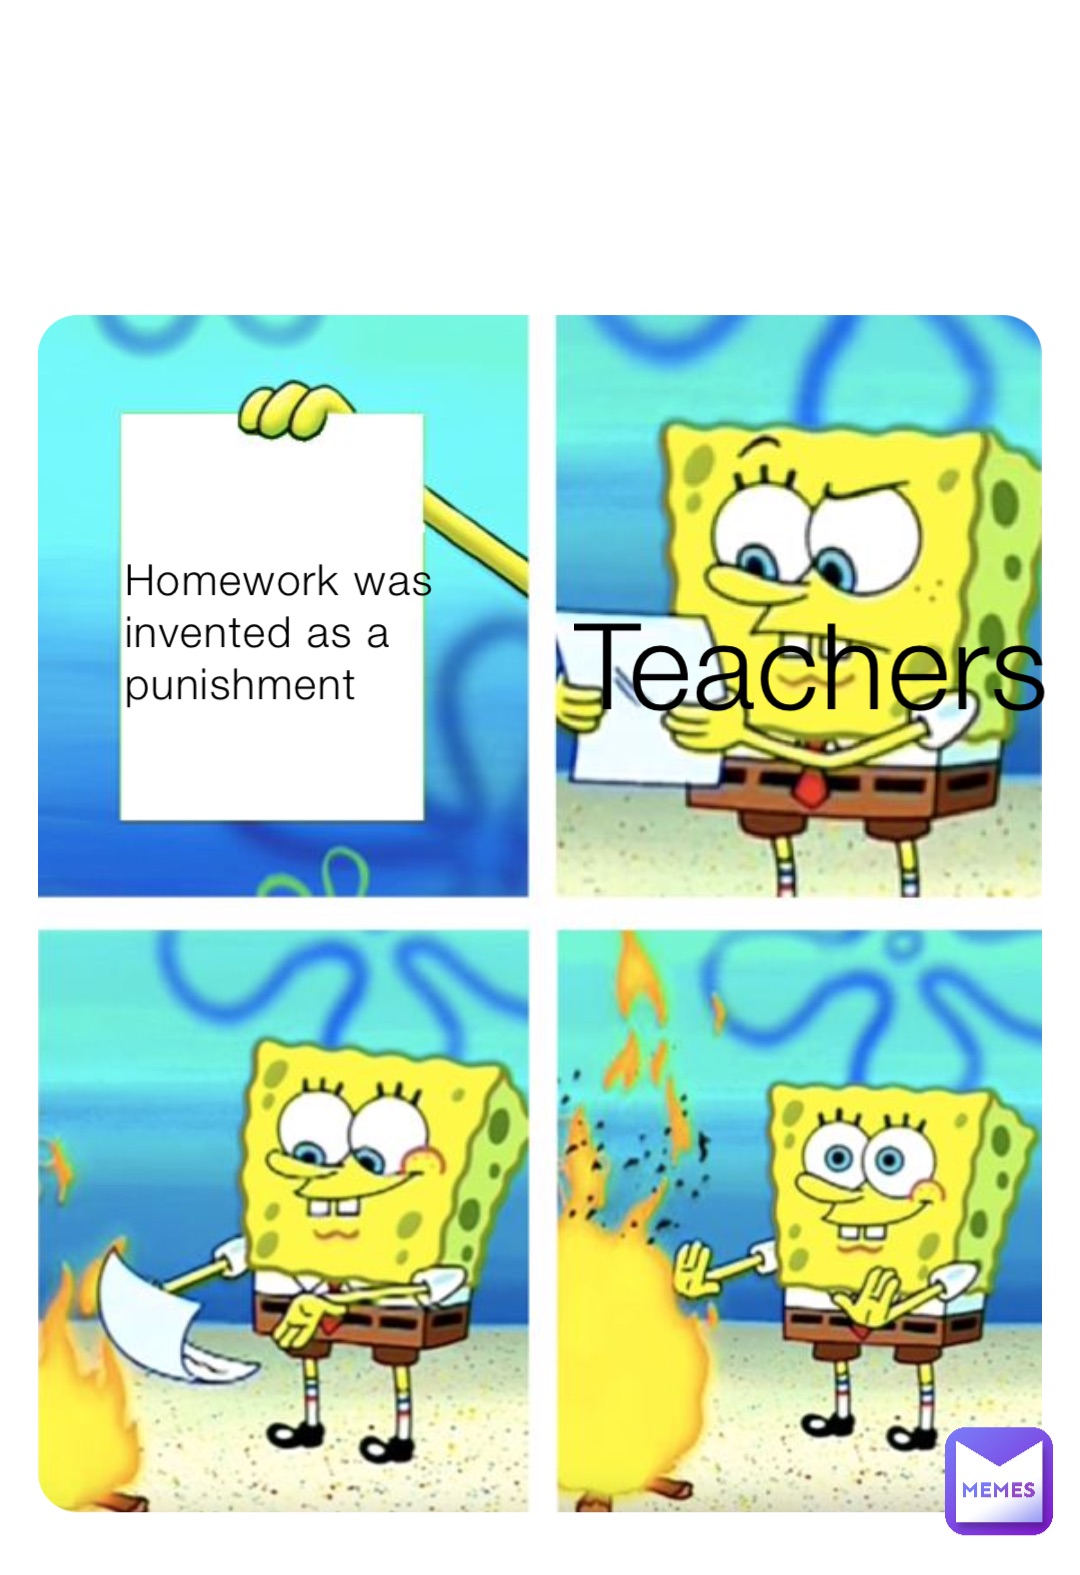 was homework first made as a punishment